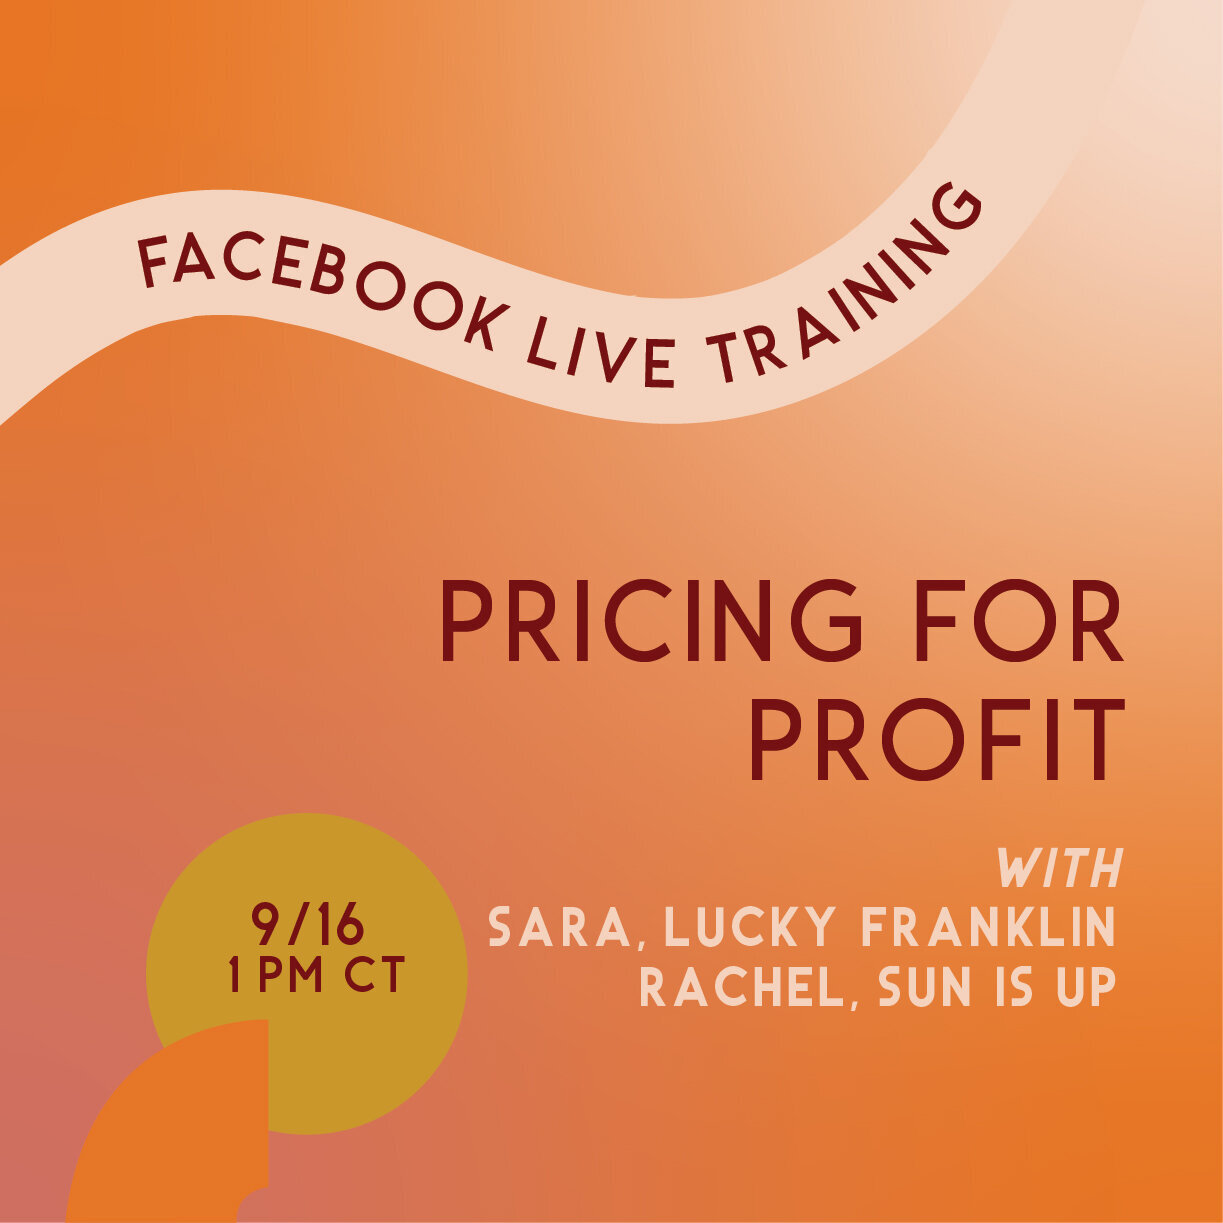 Fempowerment_Live Training-Pricing for Profit-69